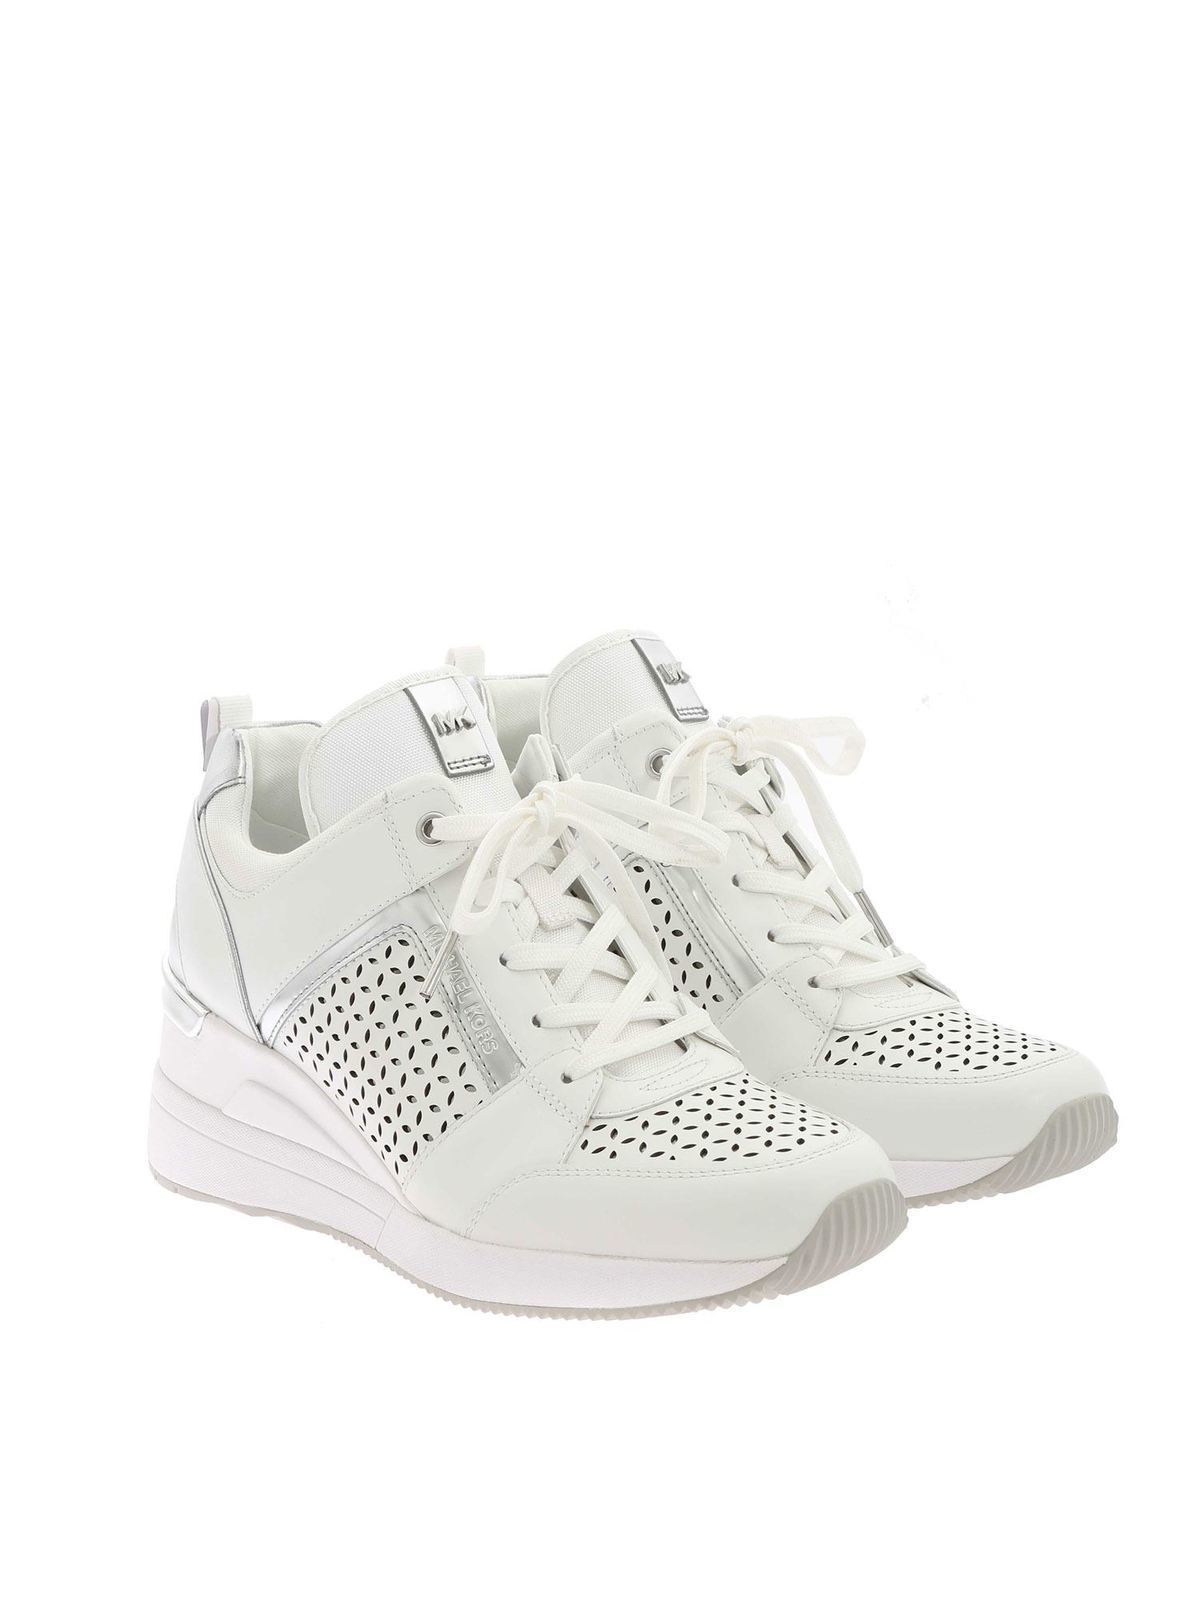 Trainers Michael Kors - Georgie sneakers in white and silver color -  43R1GEFS3L085